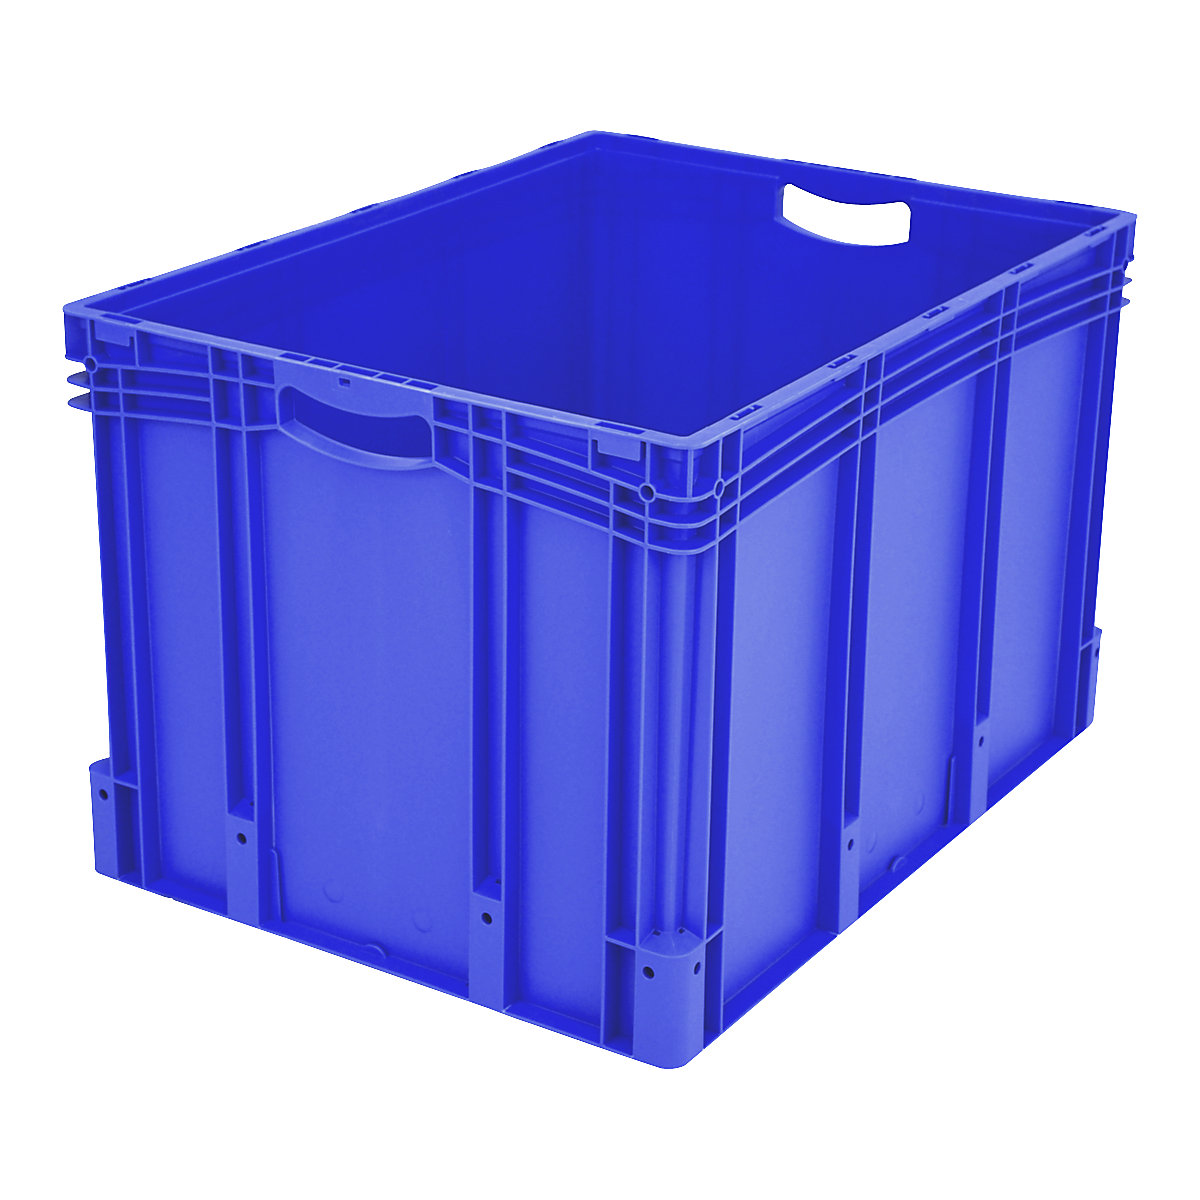 XL Euro stacking container – BITO, standard model, LxWxH 800 x 600 x 520 mm-8